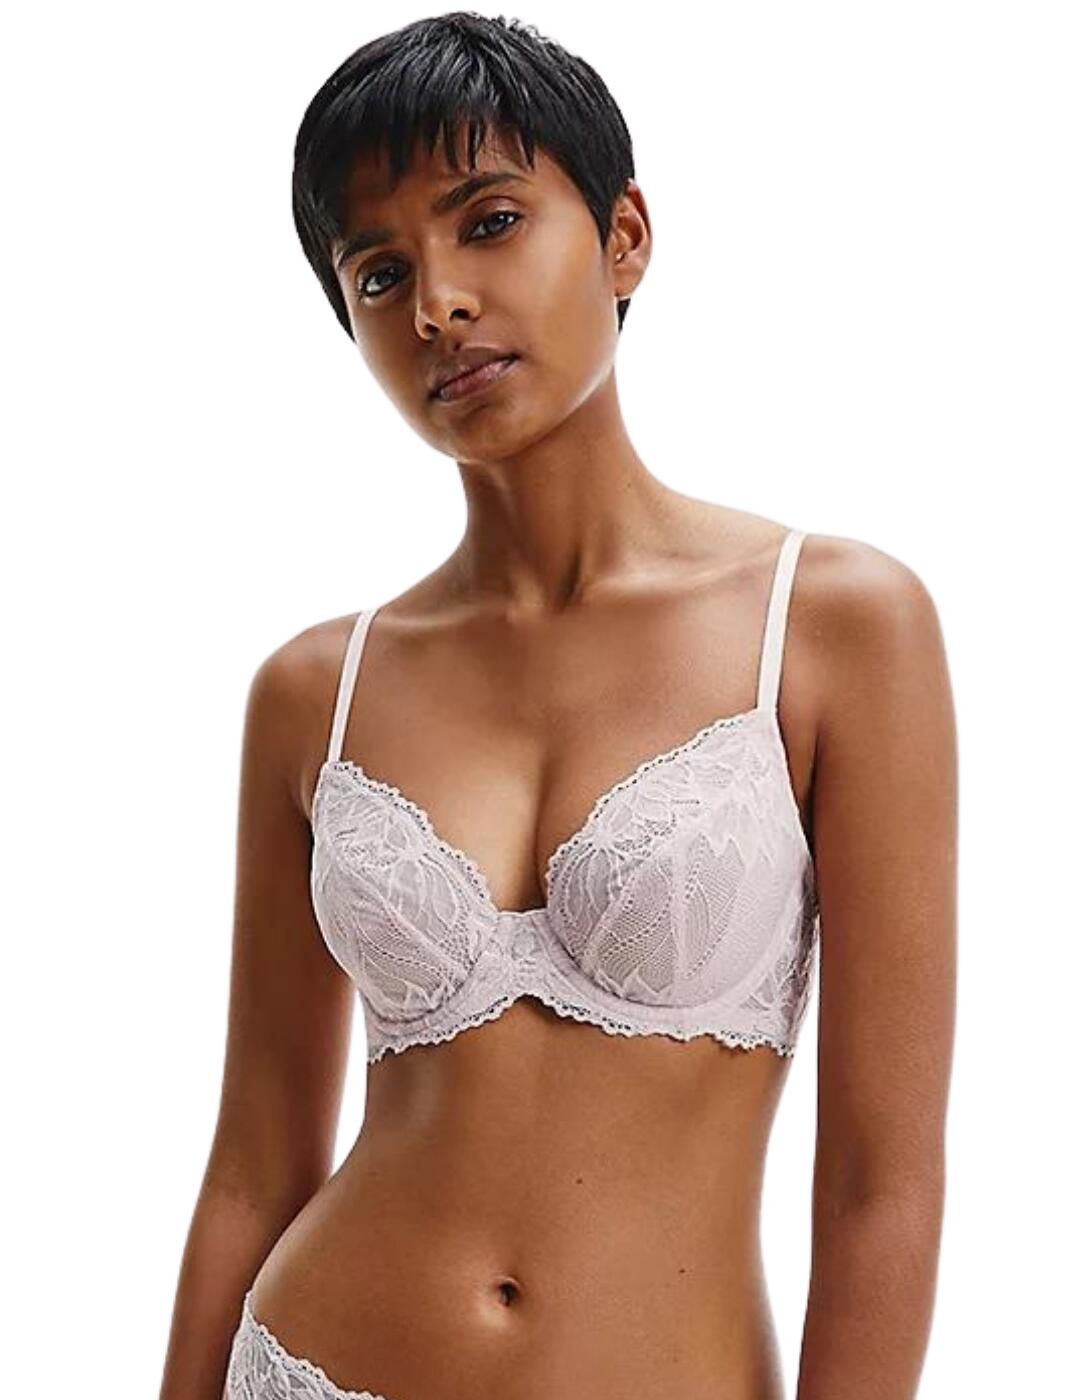 Calvin Klein Sheer Floral Lace Bra Nude Size 32D - $20 - From Dee